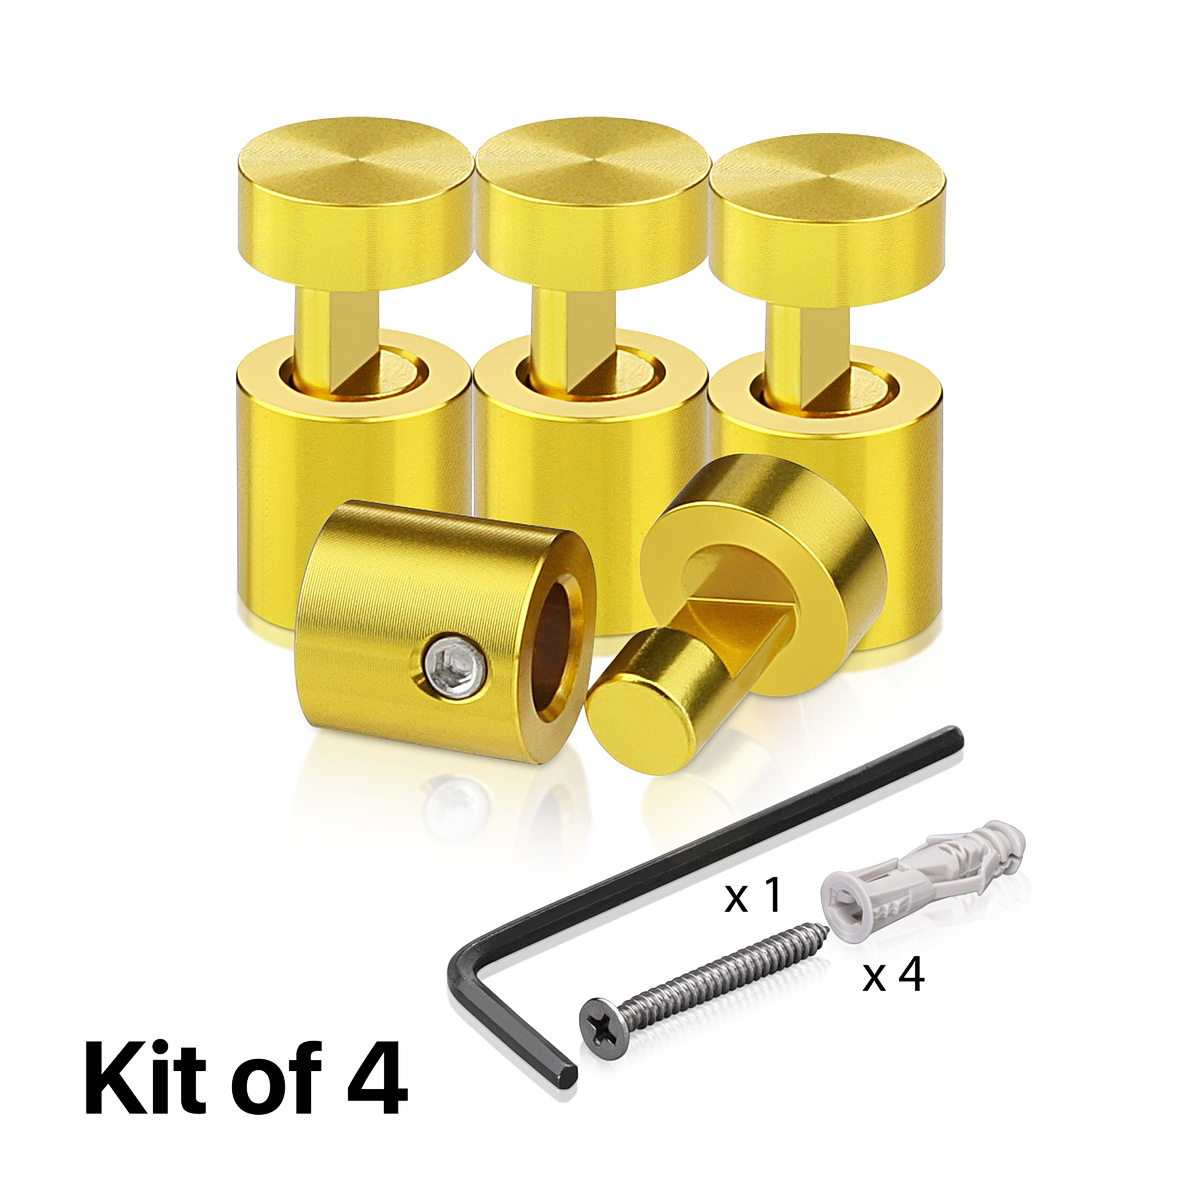 (Set of 4) 1/2'' Diameter X 1/2''  Barrel Length, Aluminum Gold Anodized Finish. Adjustable Edge Grip Standoff with (4) 2208Z Screw and (4) LANC1 Anchor  for concrete/drywall (For Inside Use Only)